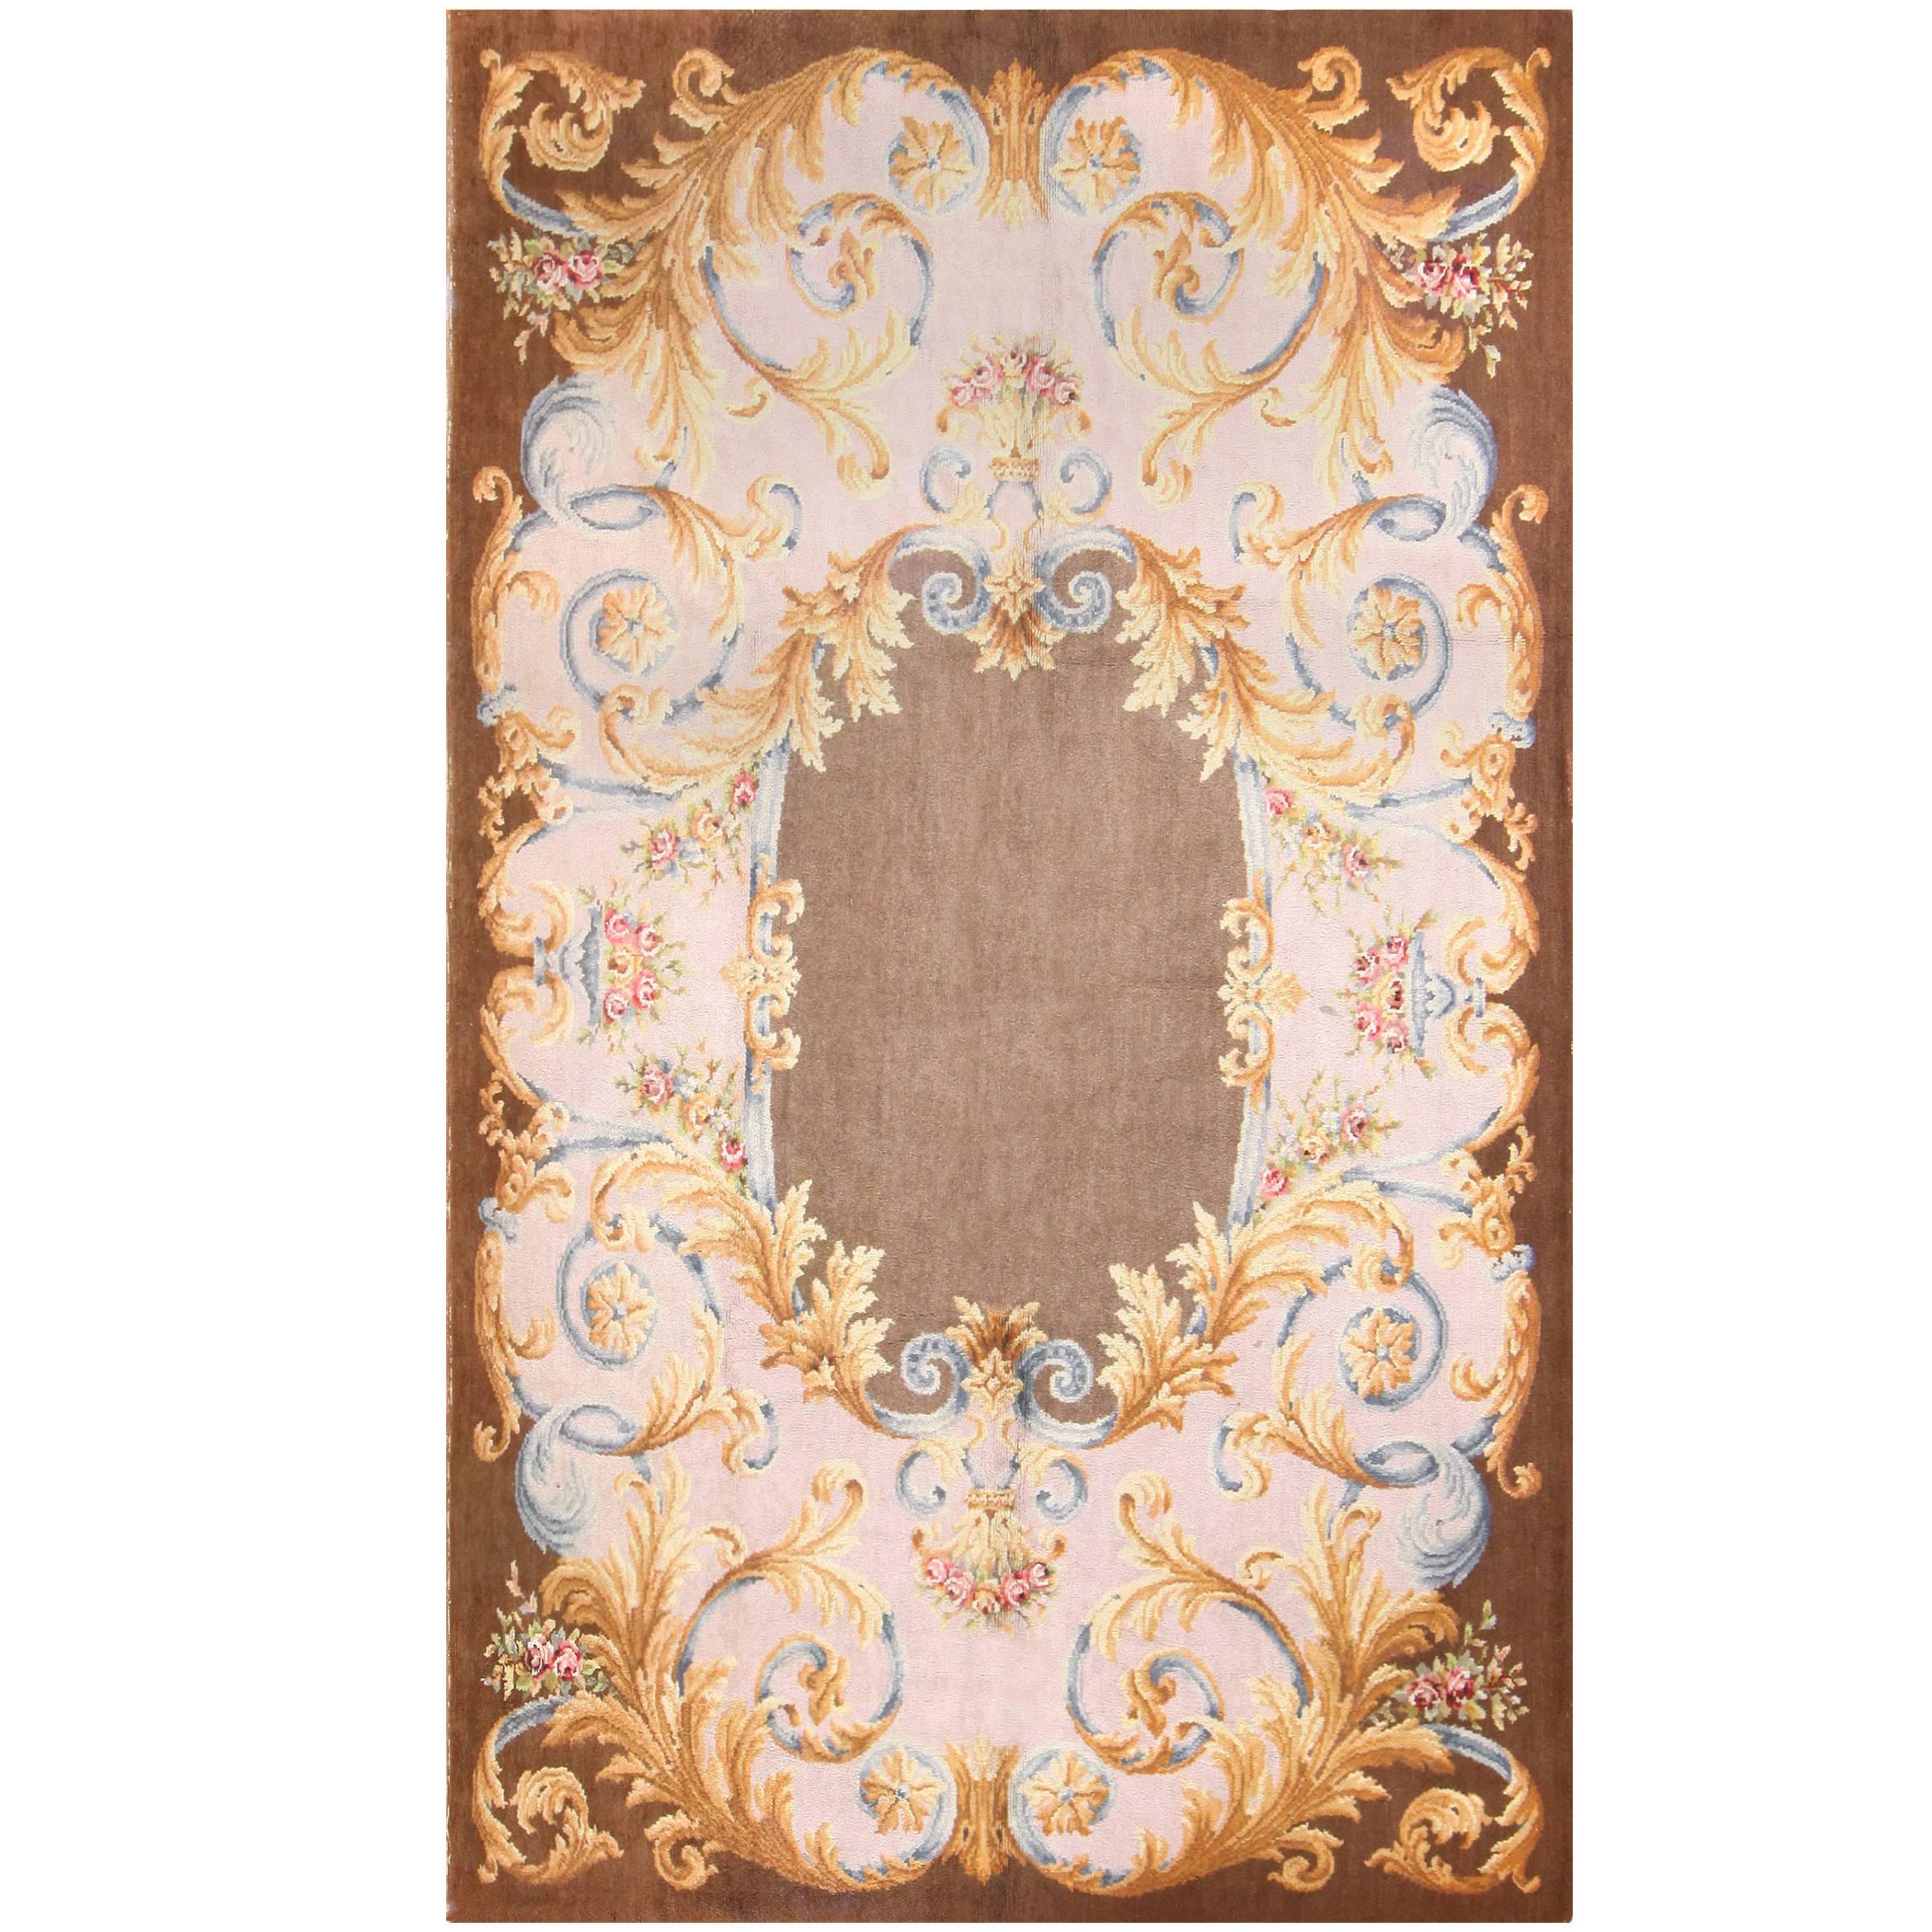 What is an Aubusson carpet?